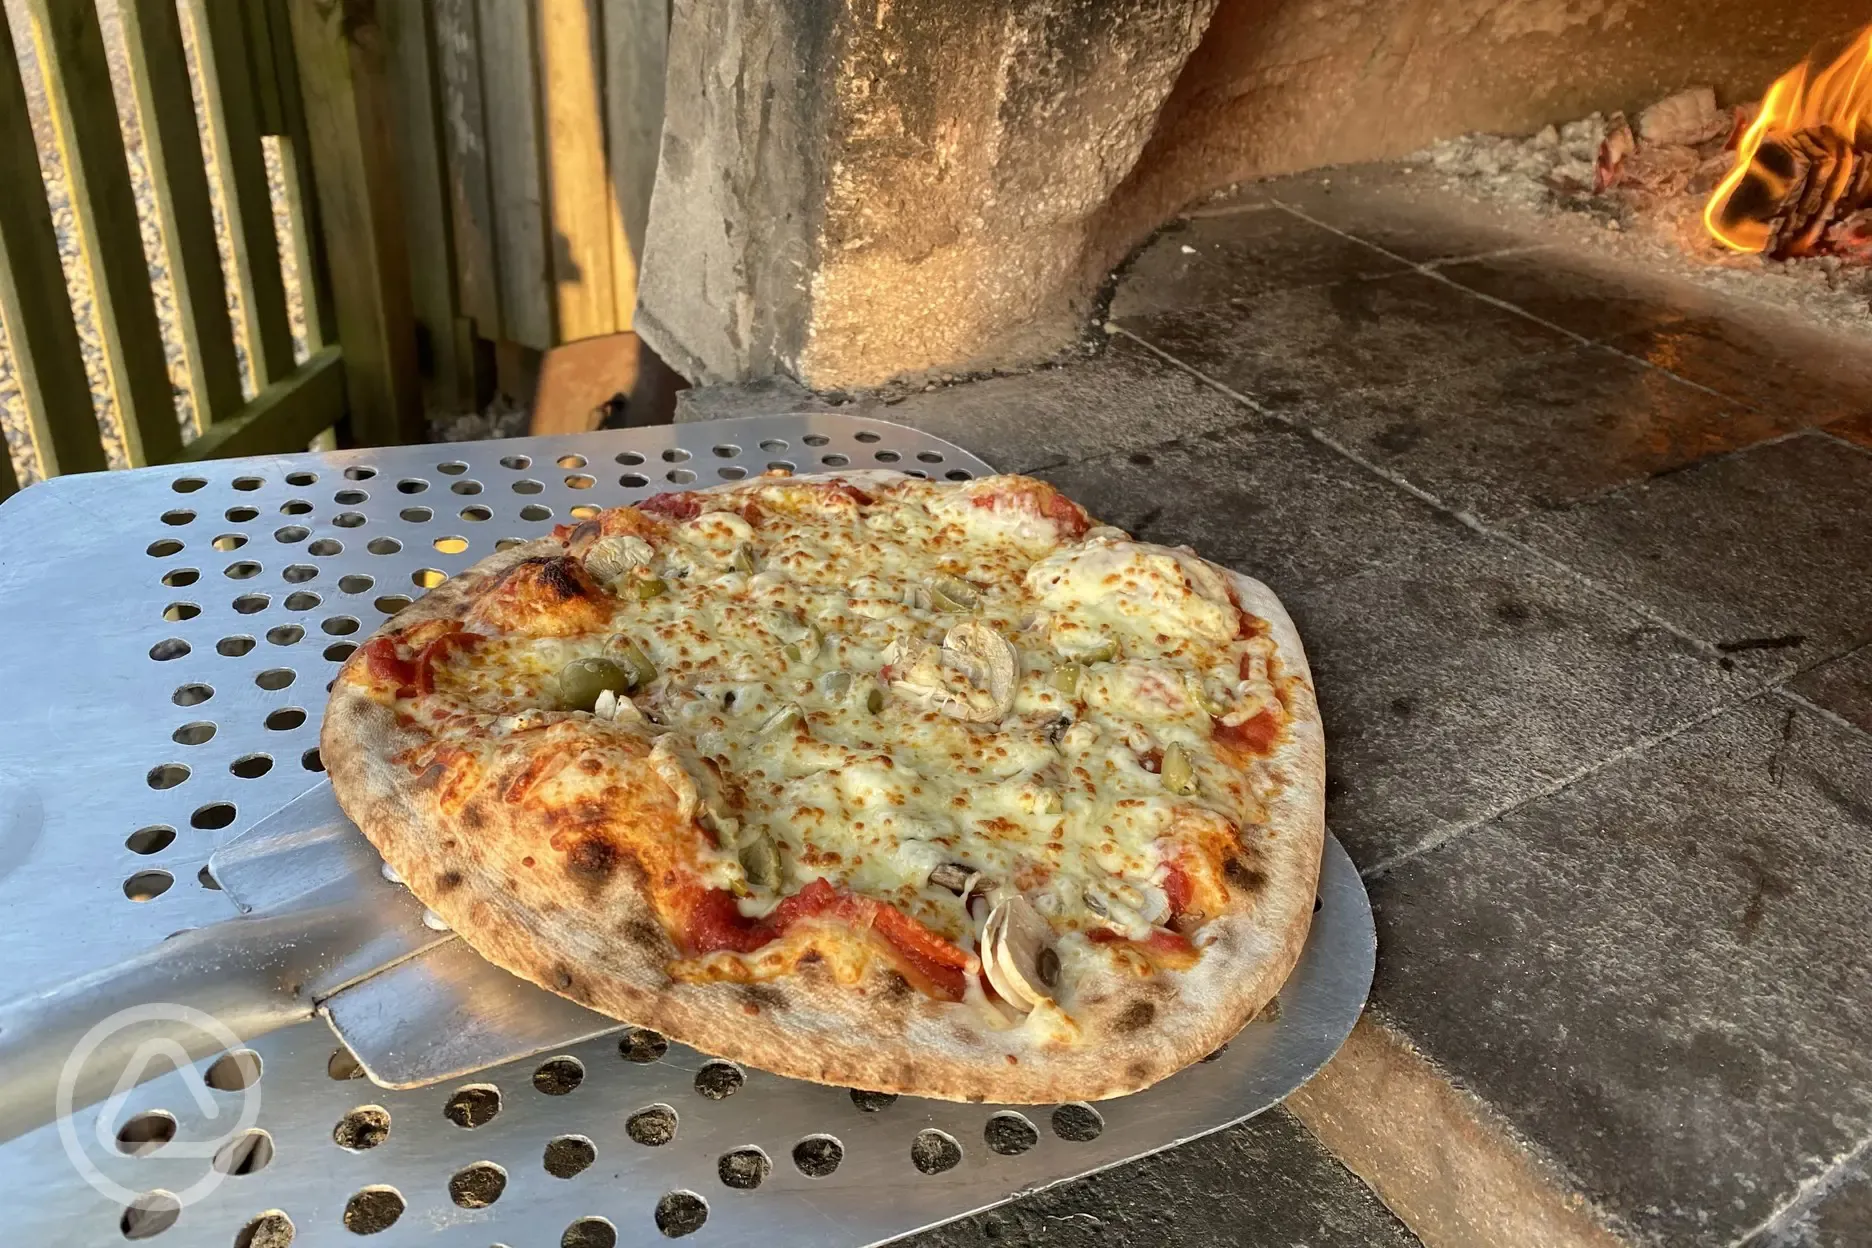 Freshly made wood-fired pizza